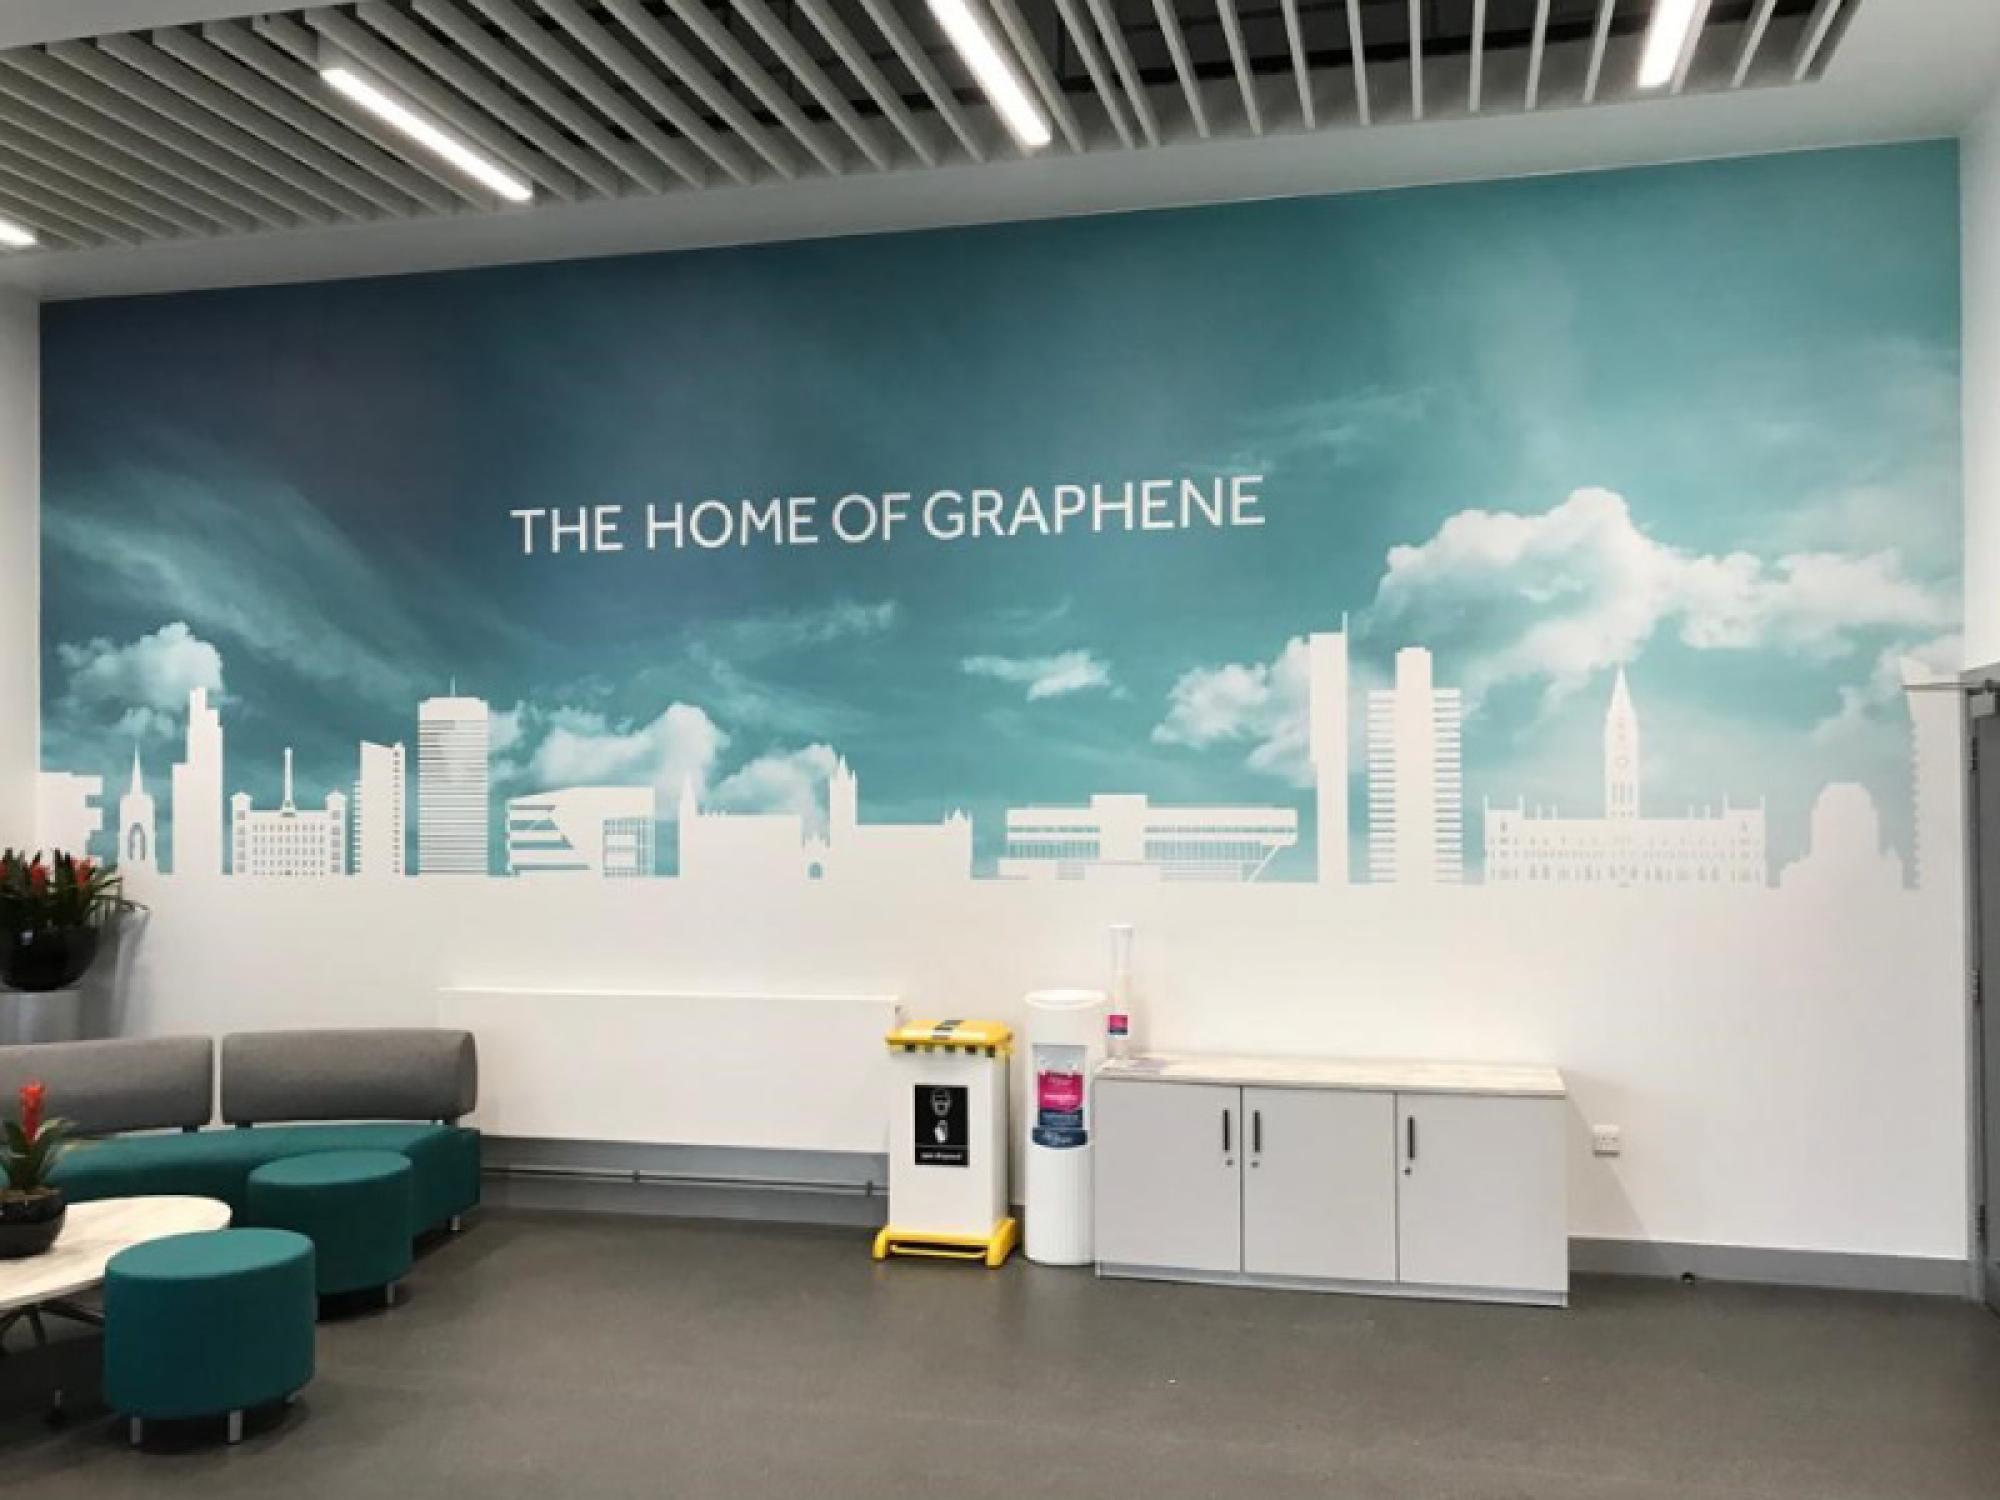 Impression installs large format graphics & custom wallpapers at the University of Manchester's Masdar Building